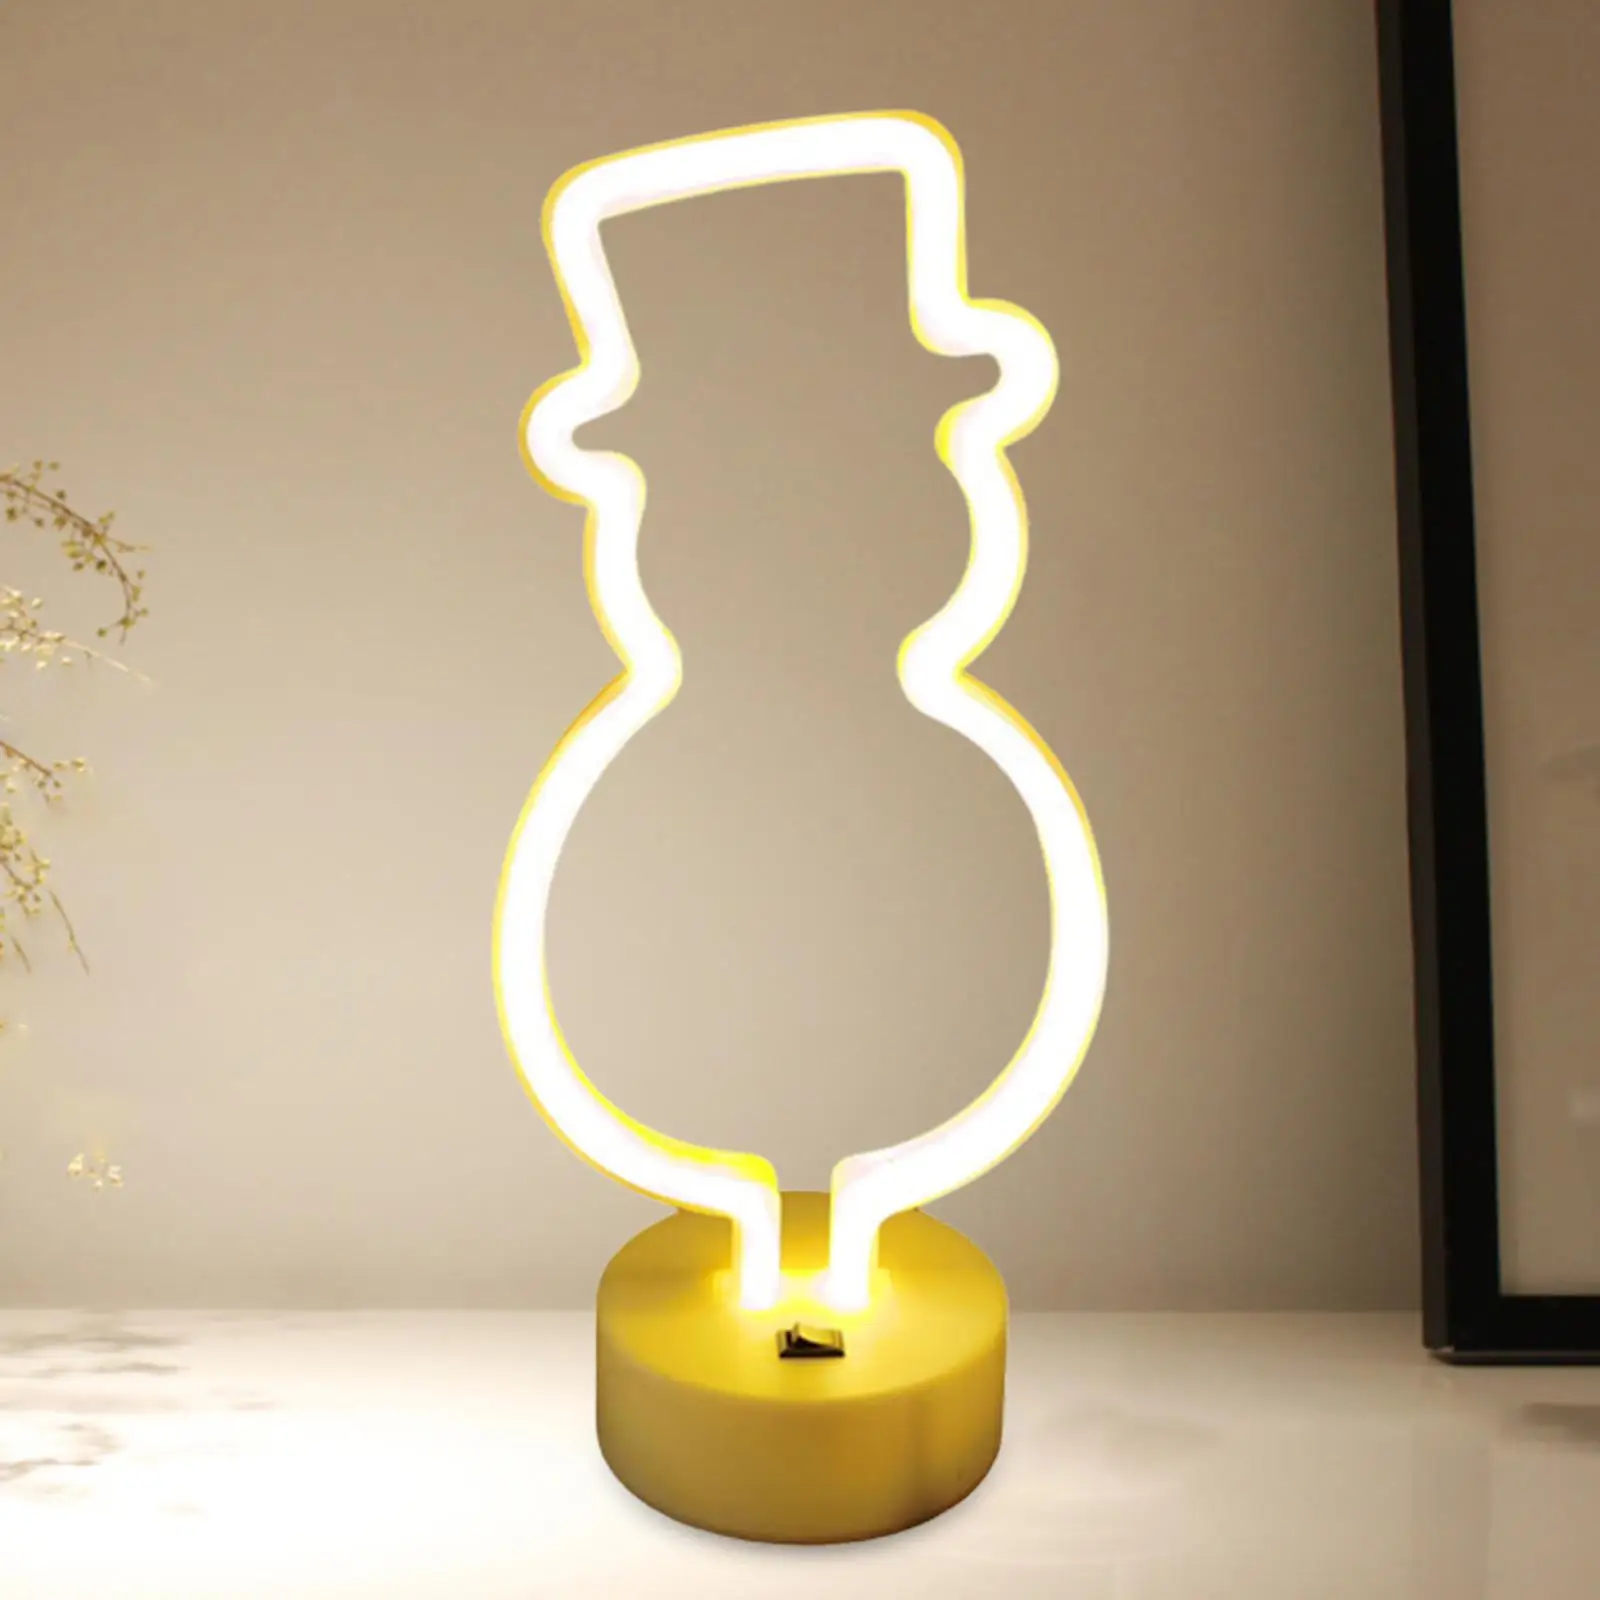 Snowman Neon Lamp Sign LED Neon Sign USB Battery Powered Night Light for Wedding Bar Pub Table Party Decor